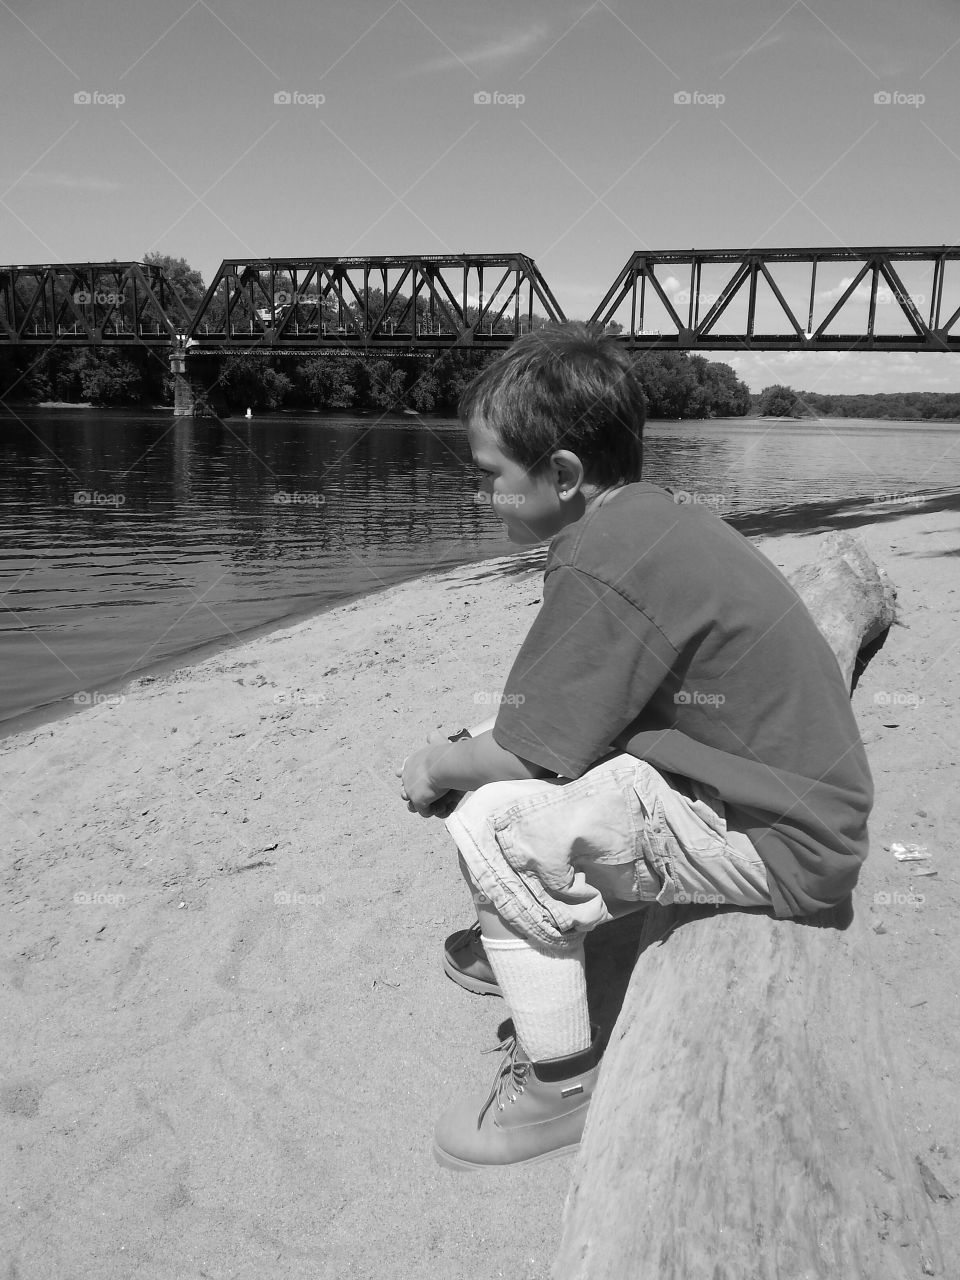 Contemplation. A boy who needed time after losing his father